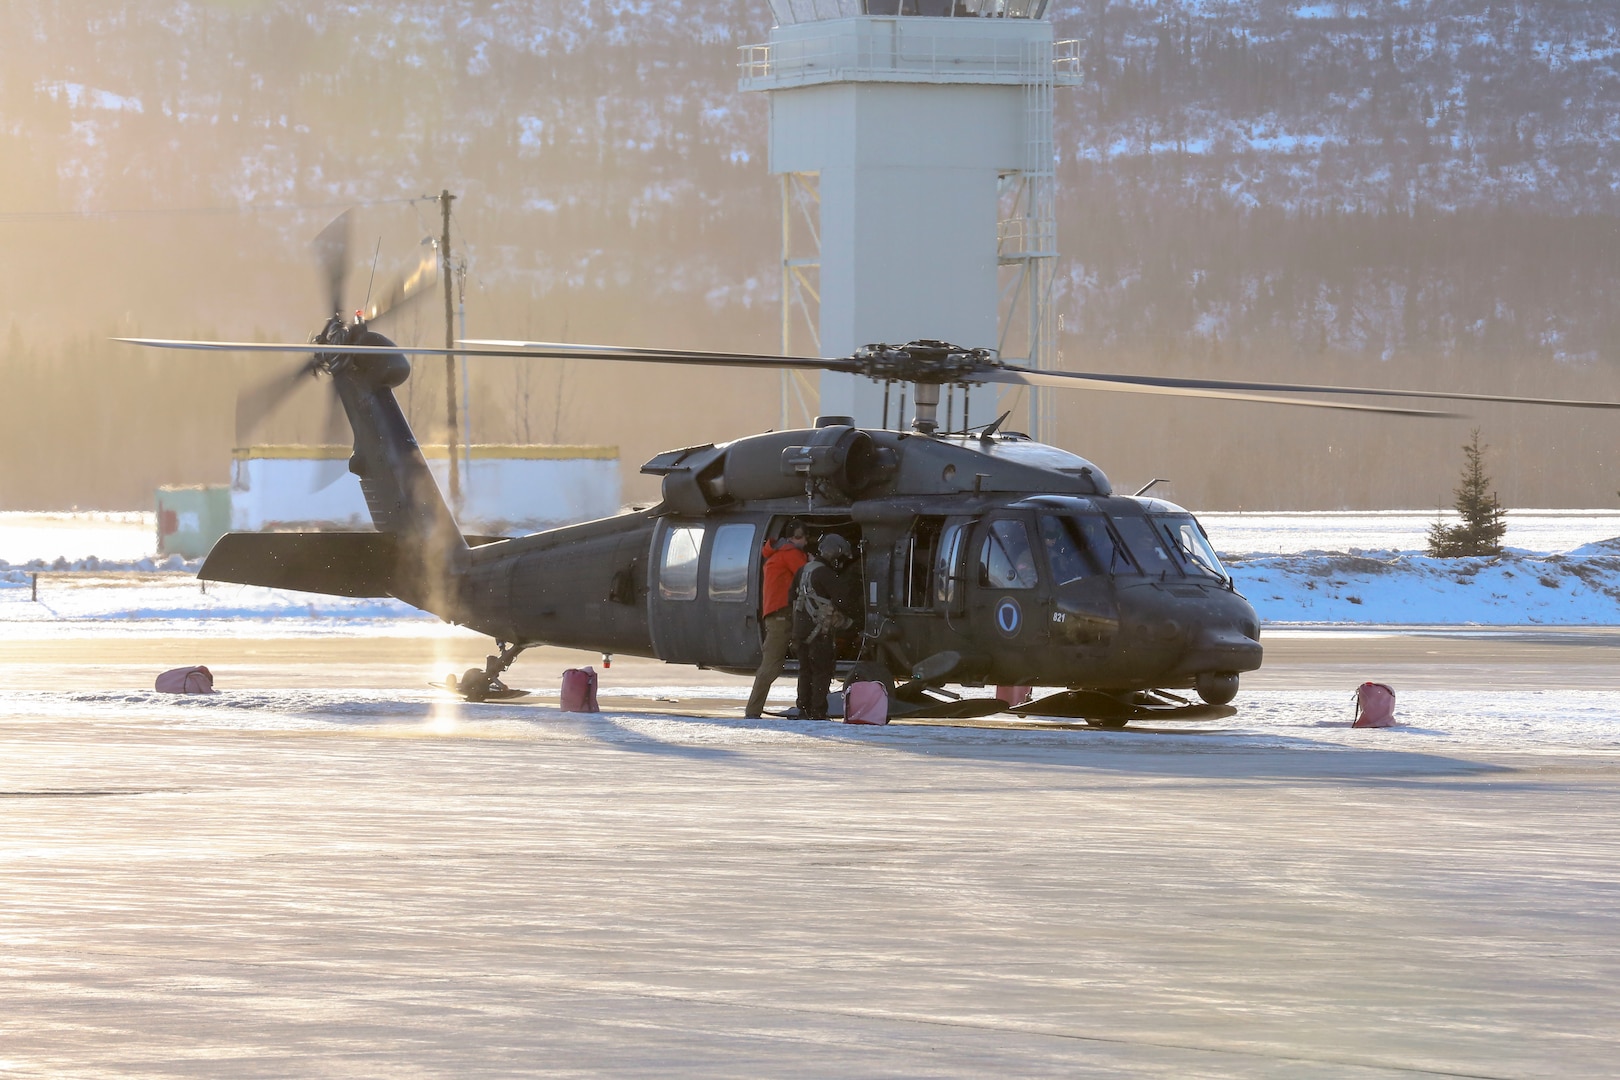 Alaska National Guardsmen launch from Bryant Army Airfield on Joint Base Elmendorf-Richardson, Alaska, via a 1st Battalion, 207th Aviation Regiment, UH-60 Black Hawk helicopter with two pararescuemen from the 212th Rescue Squadron, 176th Wing, and an Army critical care flight paramedic from Detachment 2, Golf Company, 2nd General Support Aviation Battalion, 104th Regiment, on board to conduct continued search-and-rescue operations for a missing aircraft in the vicinity of Rainy Pass, March 12, 2019.